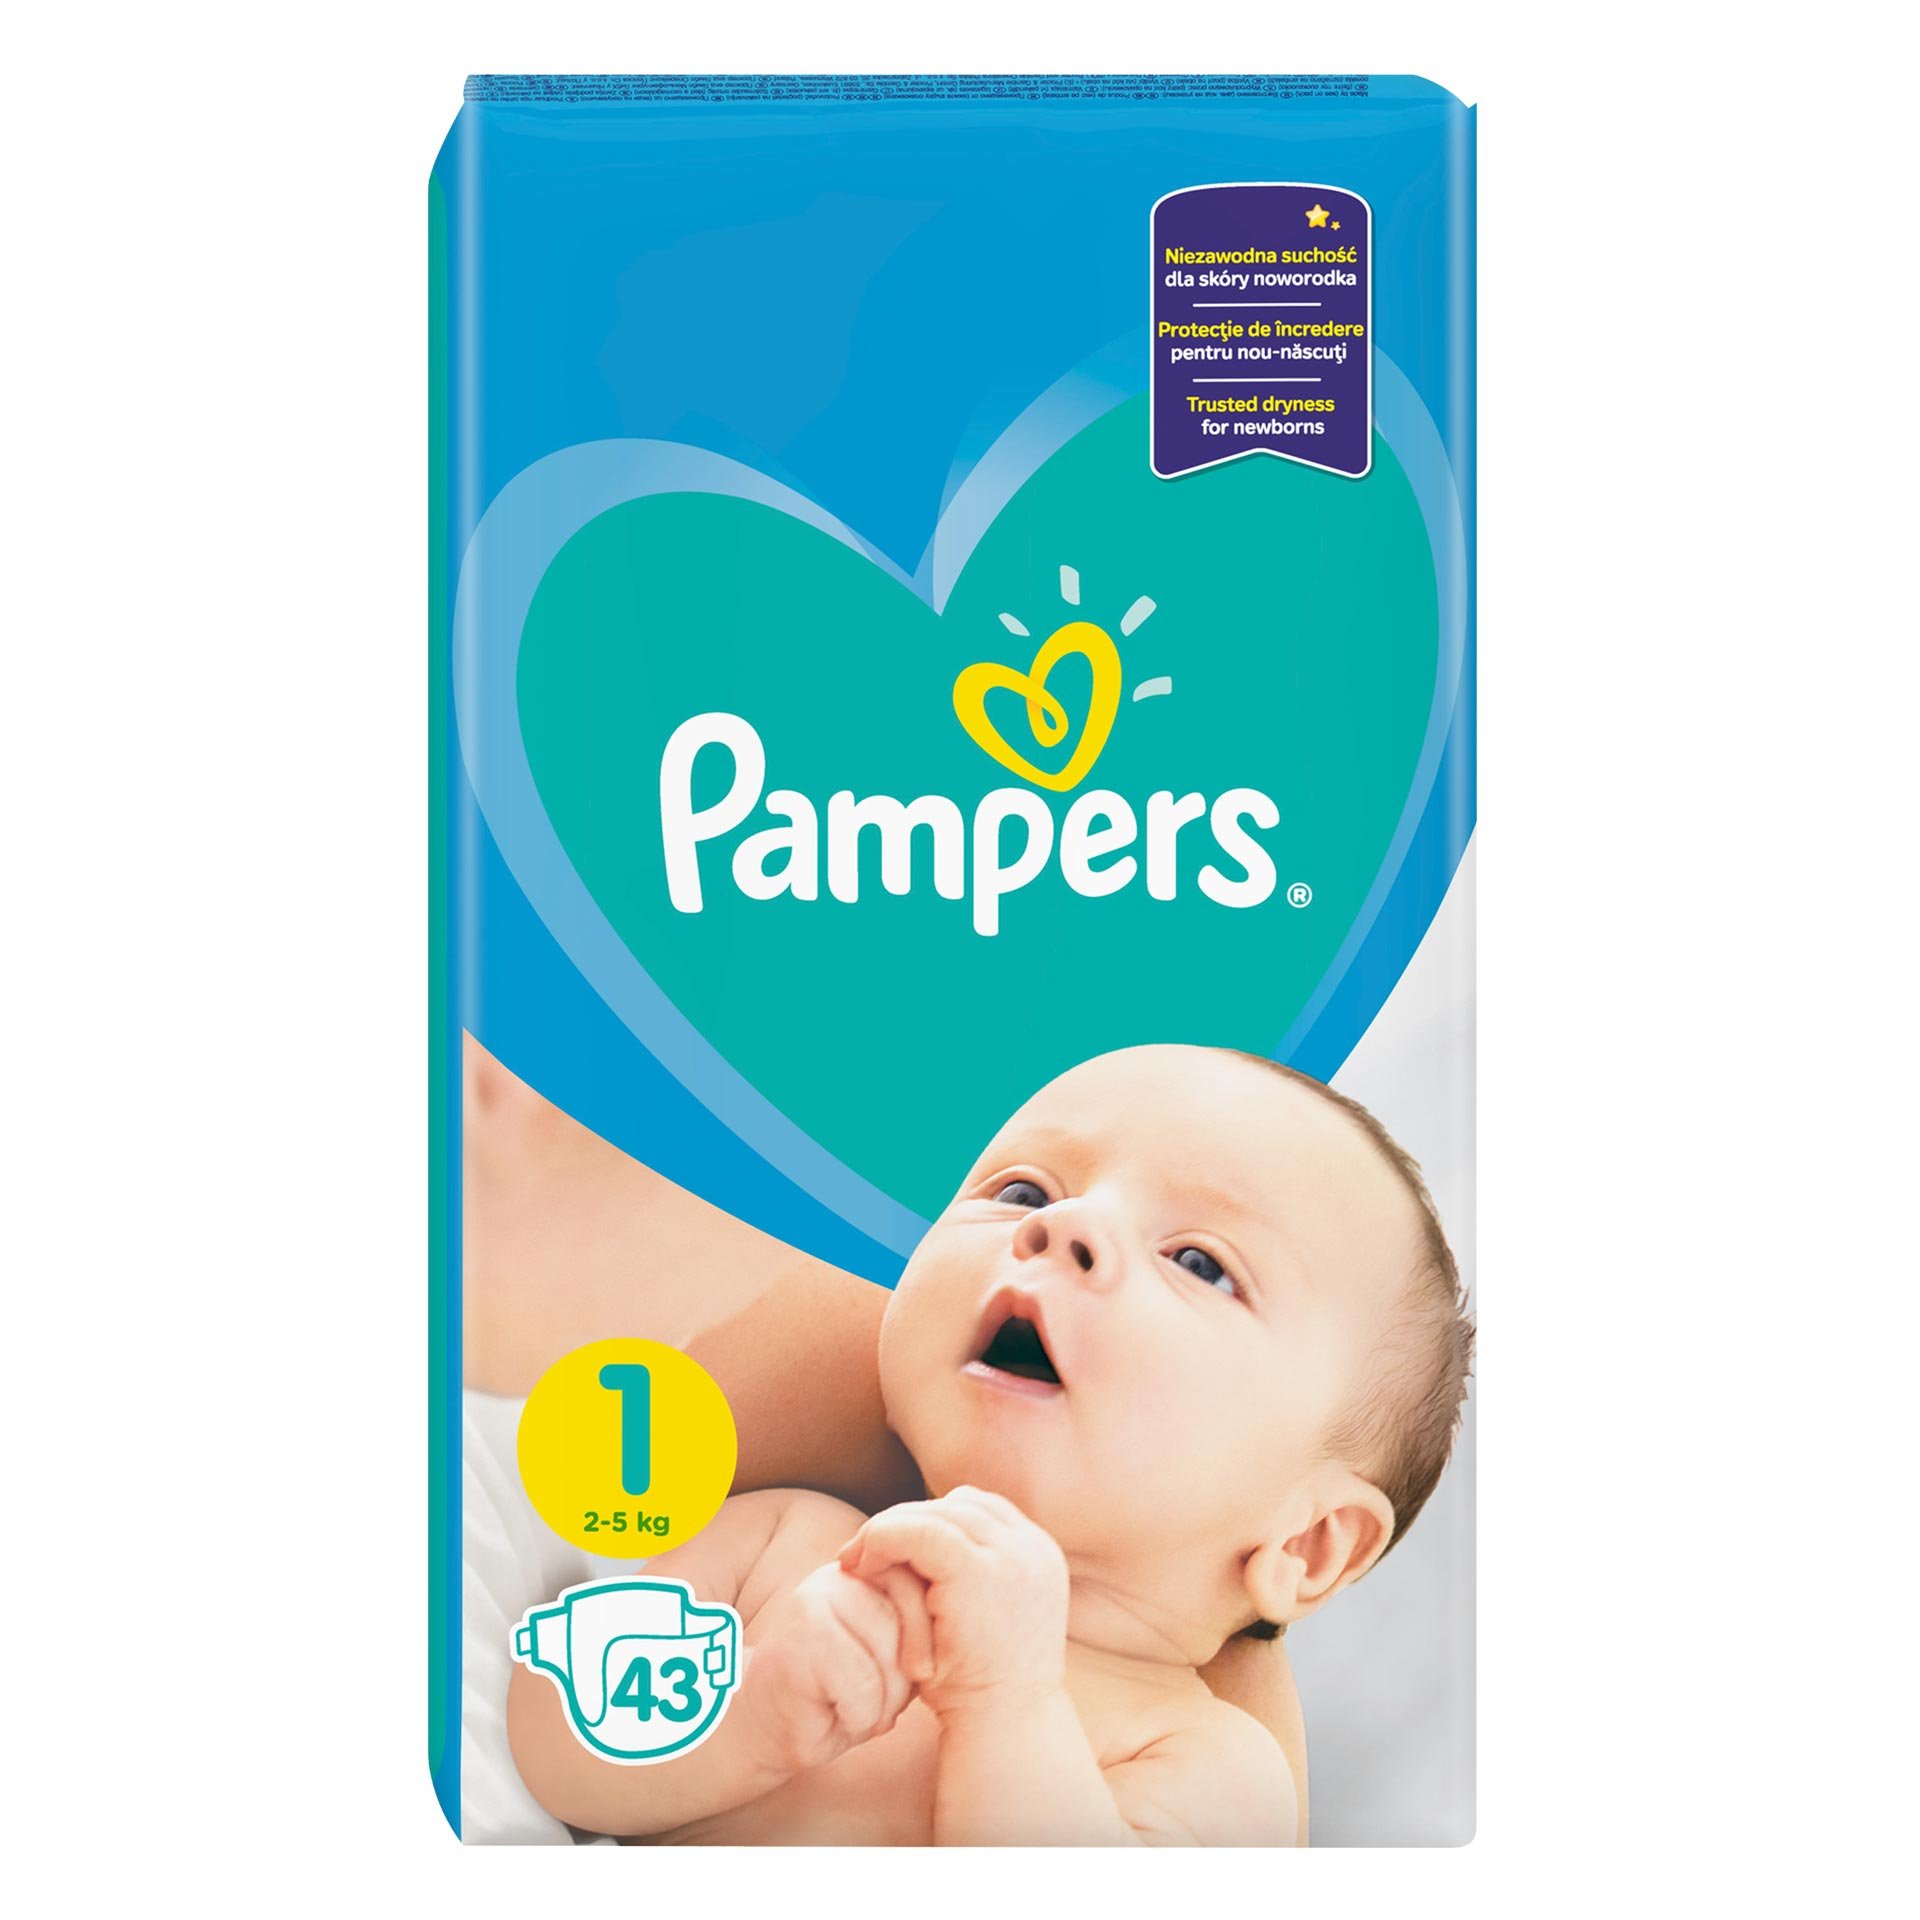 PAMPERS NR 1, NEW BABY 2-5KG, 43 BUC